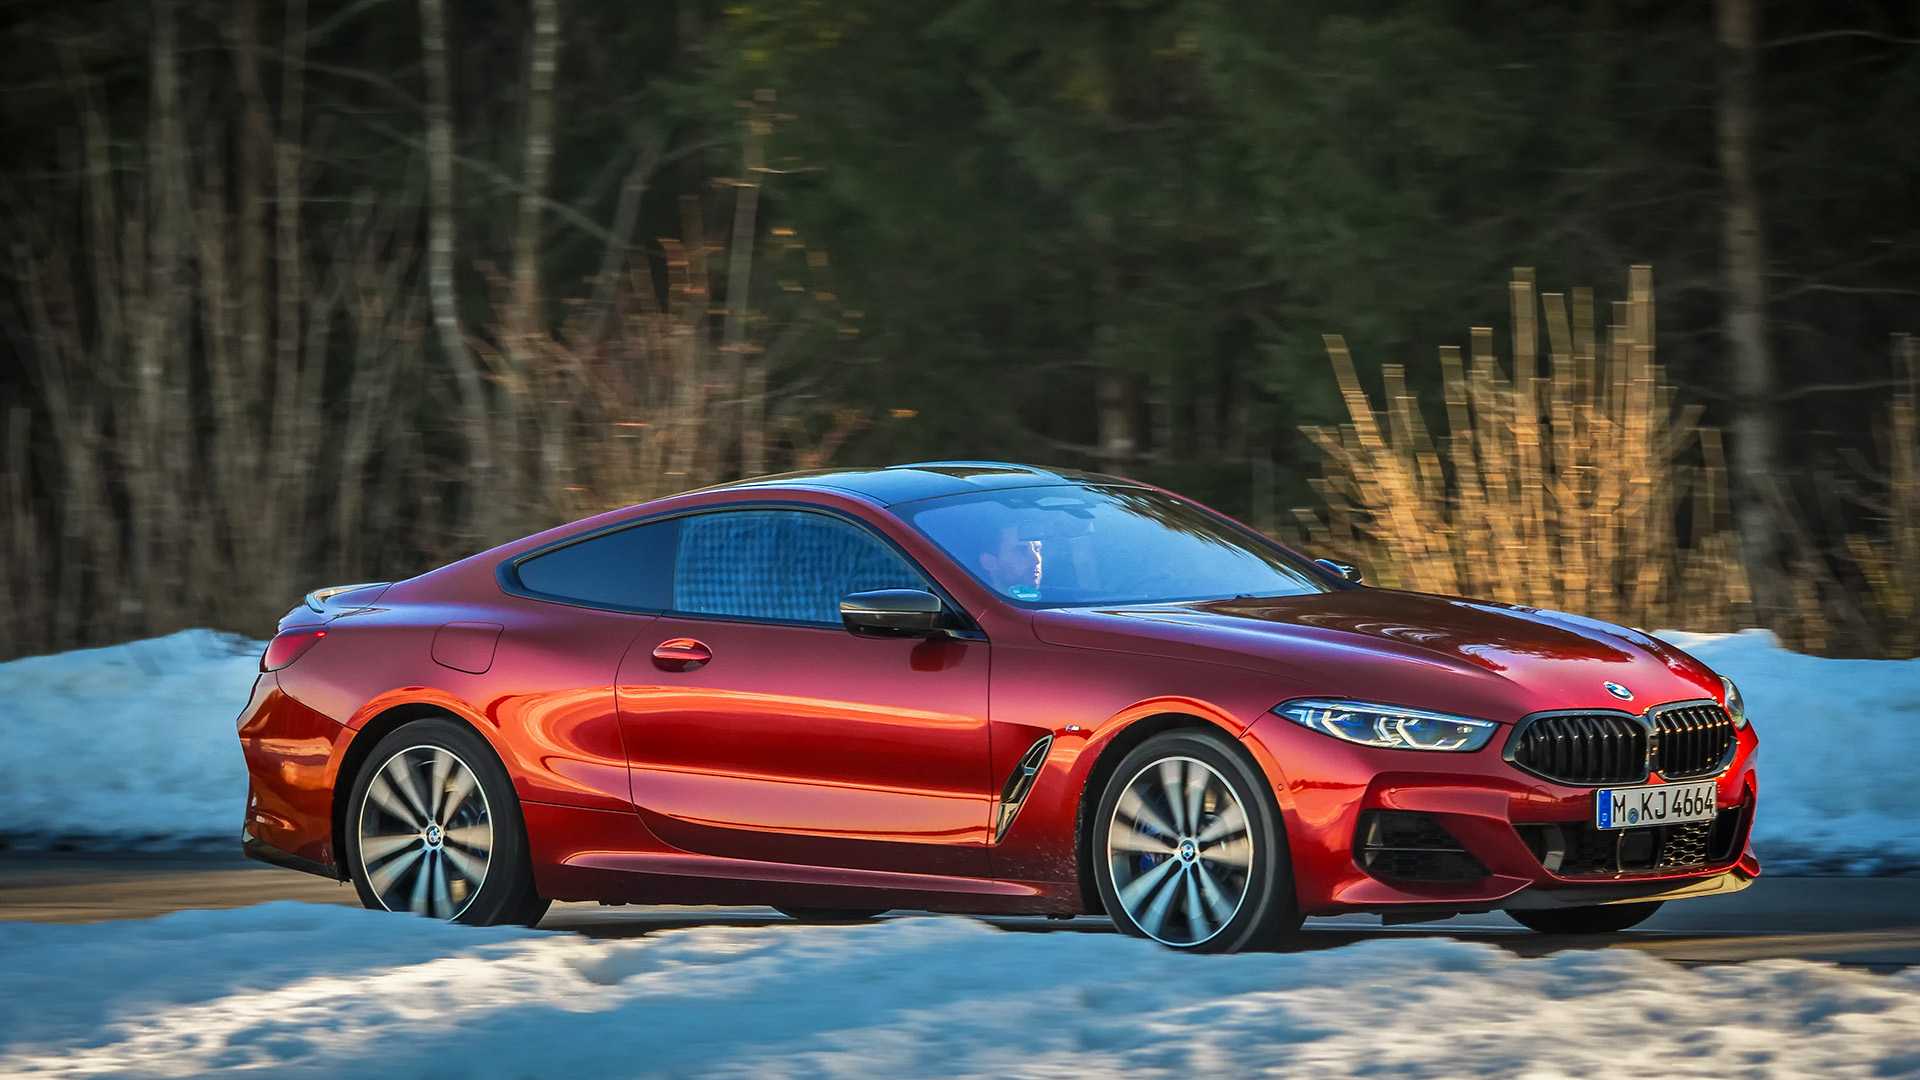 BMW M850i 6 month review